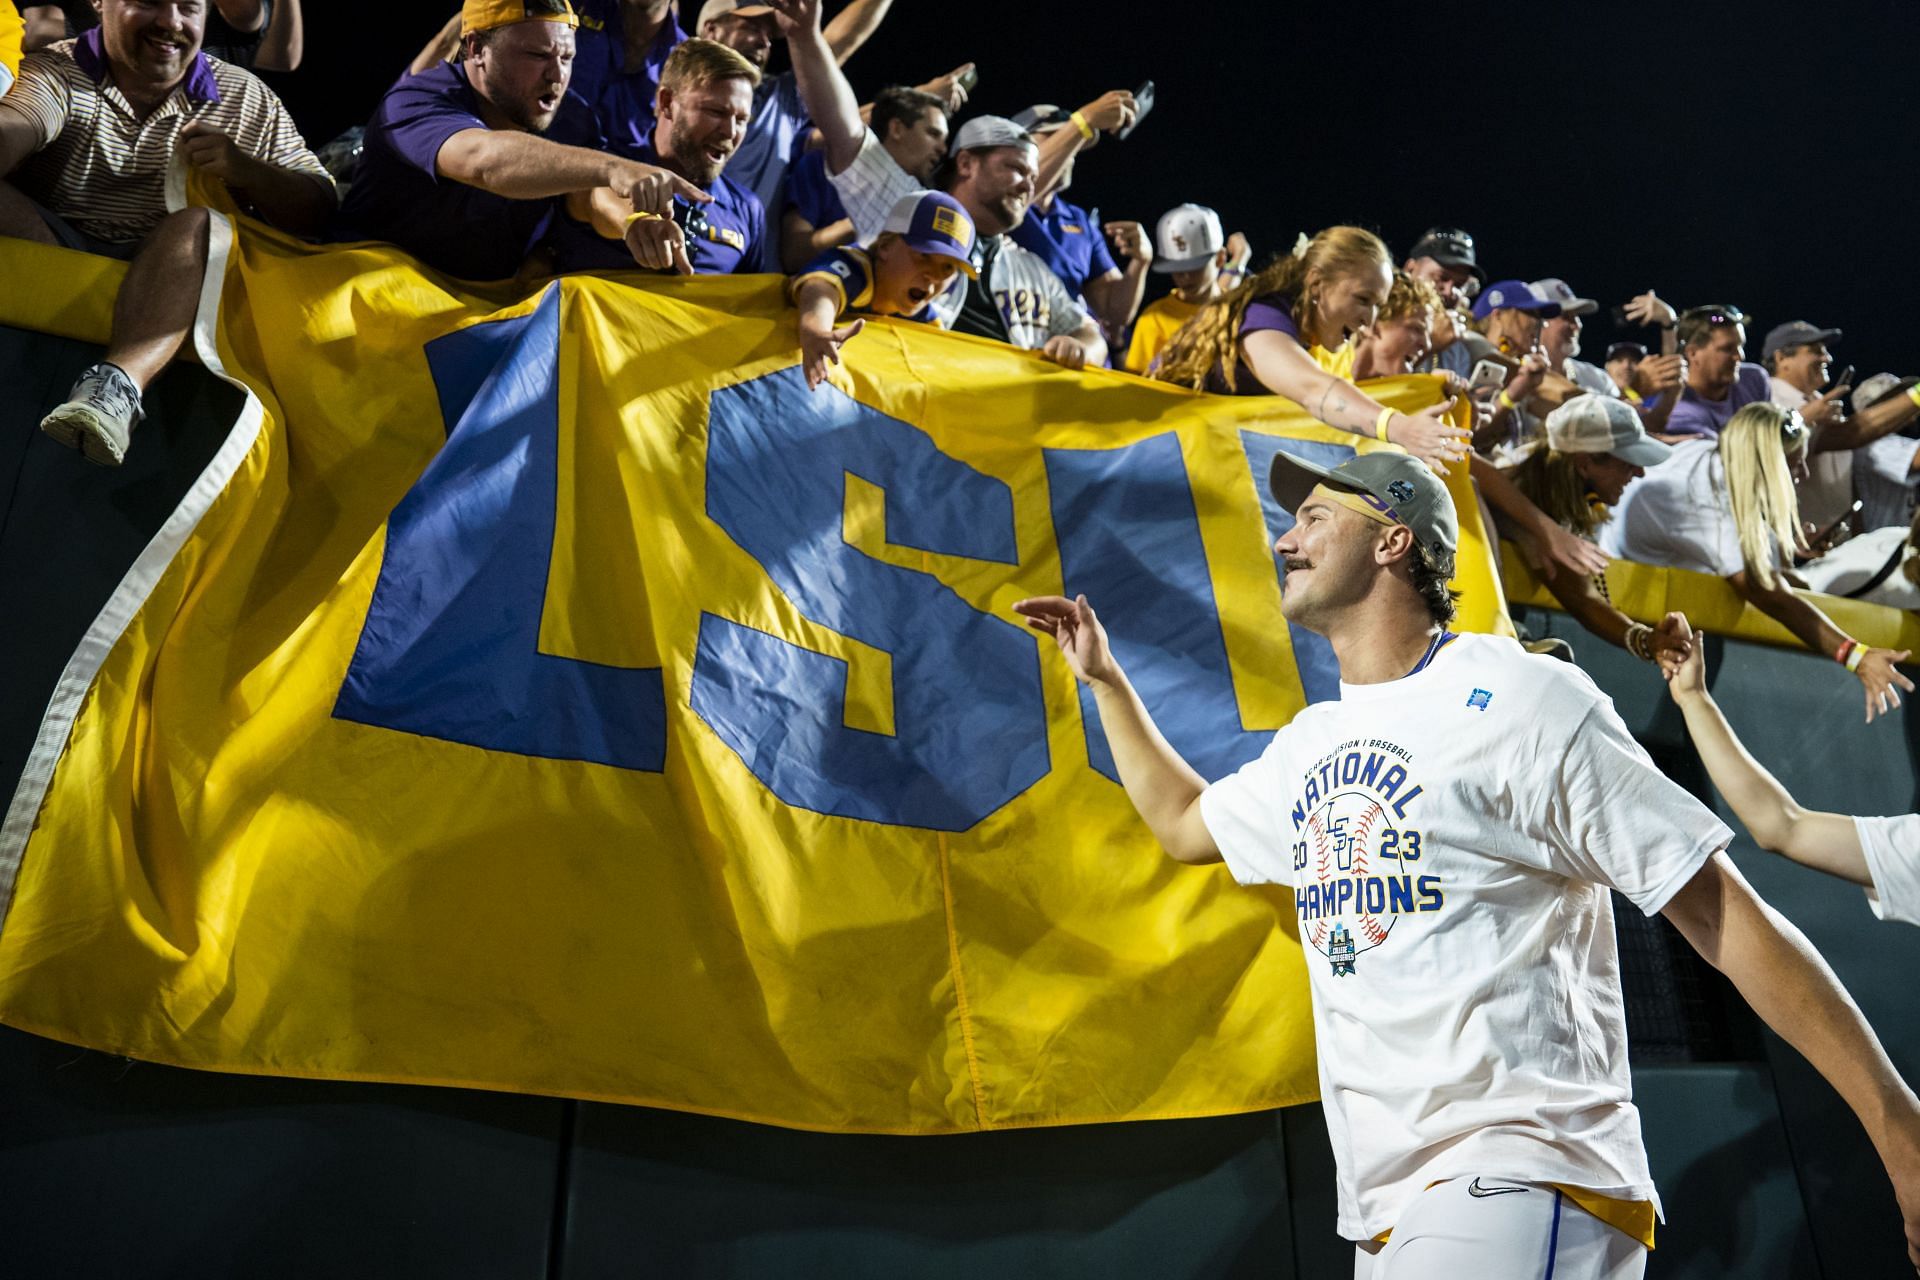 Paul Skenes #20 of the LSU Tigers greets fans after winning the NCAA College World Series in Omaha